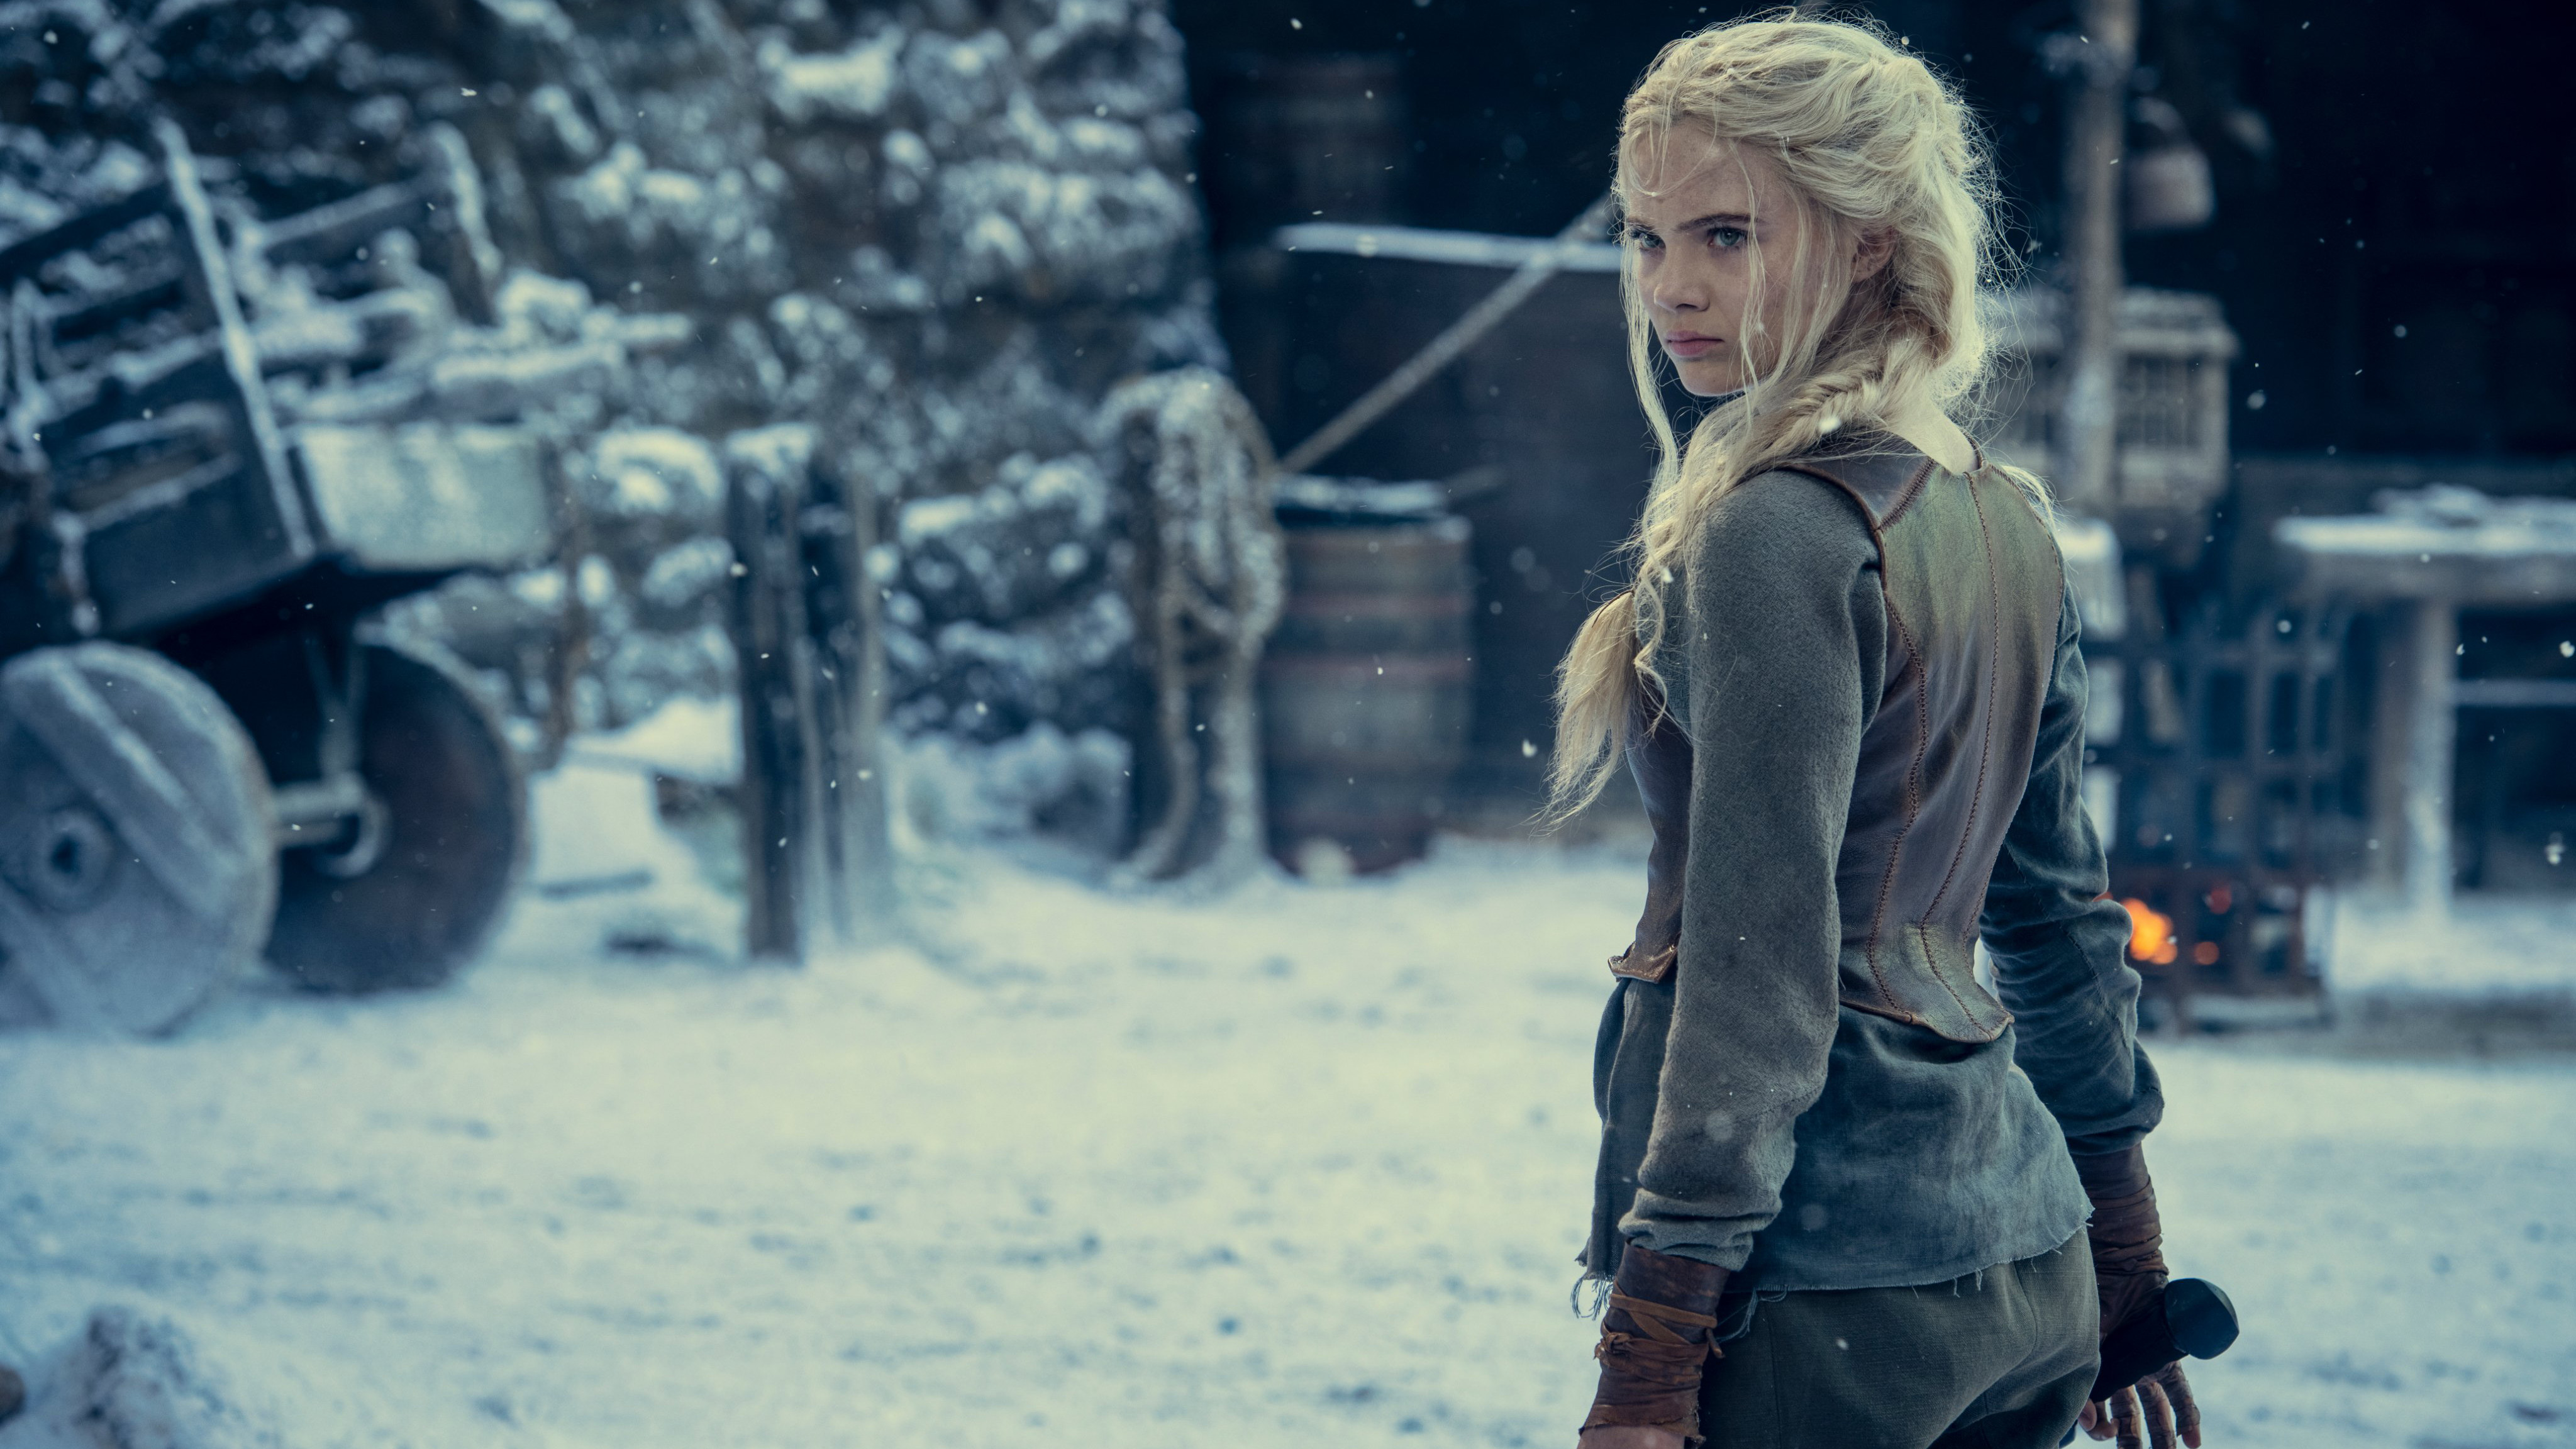 Here's a new photo of Ciri in The Witcher season 2.